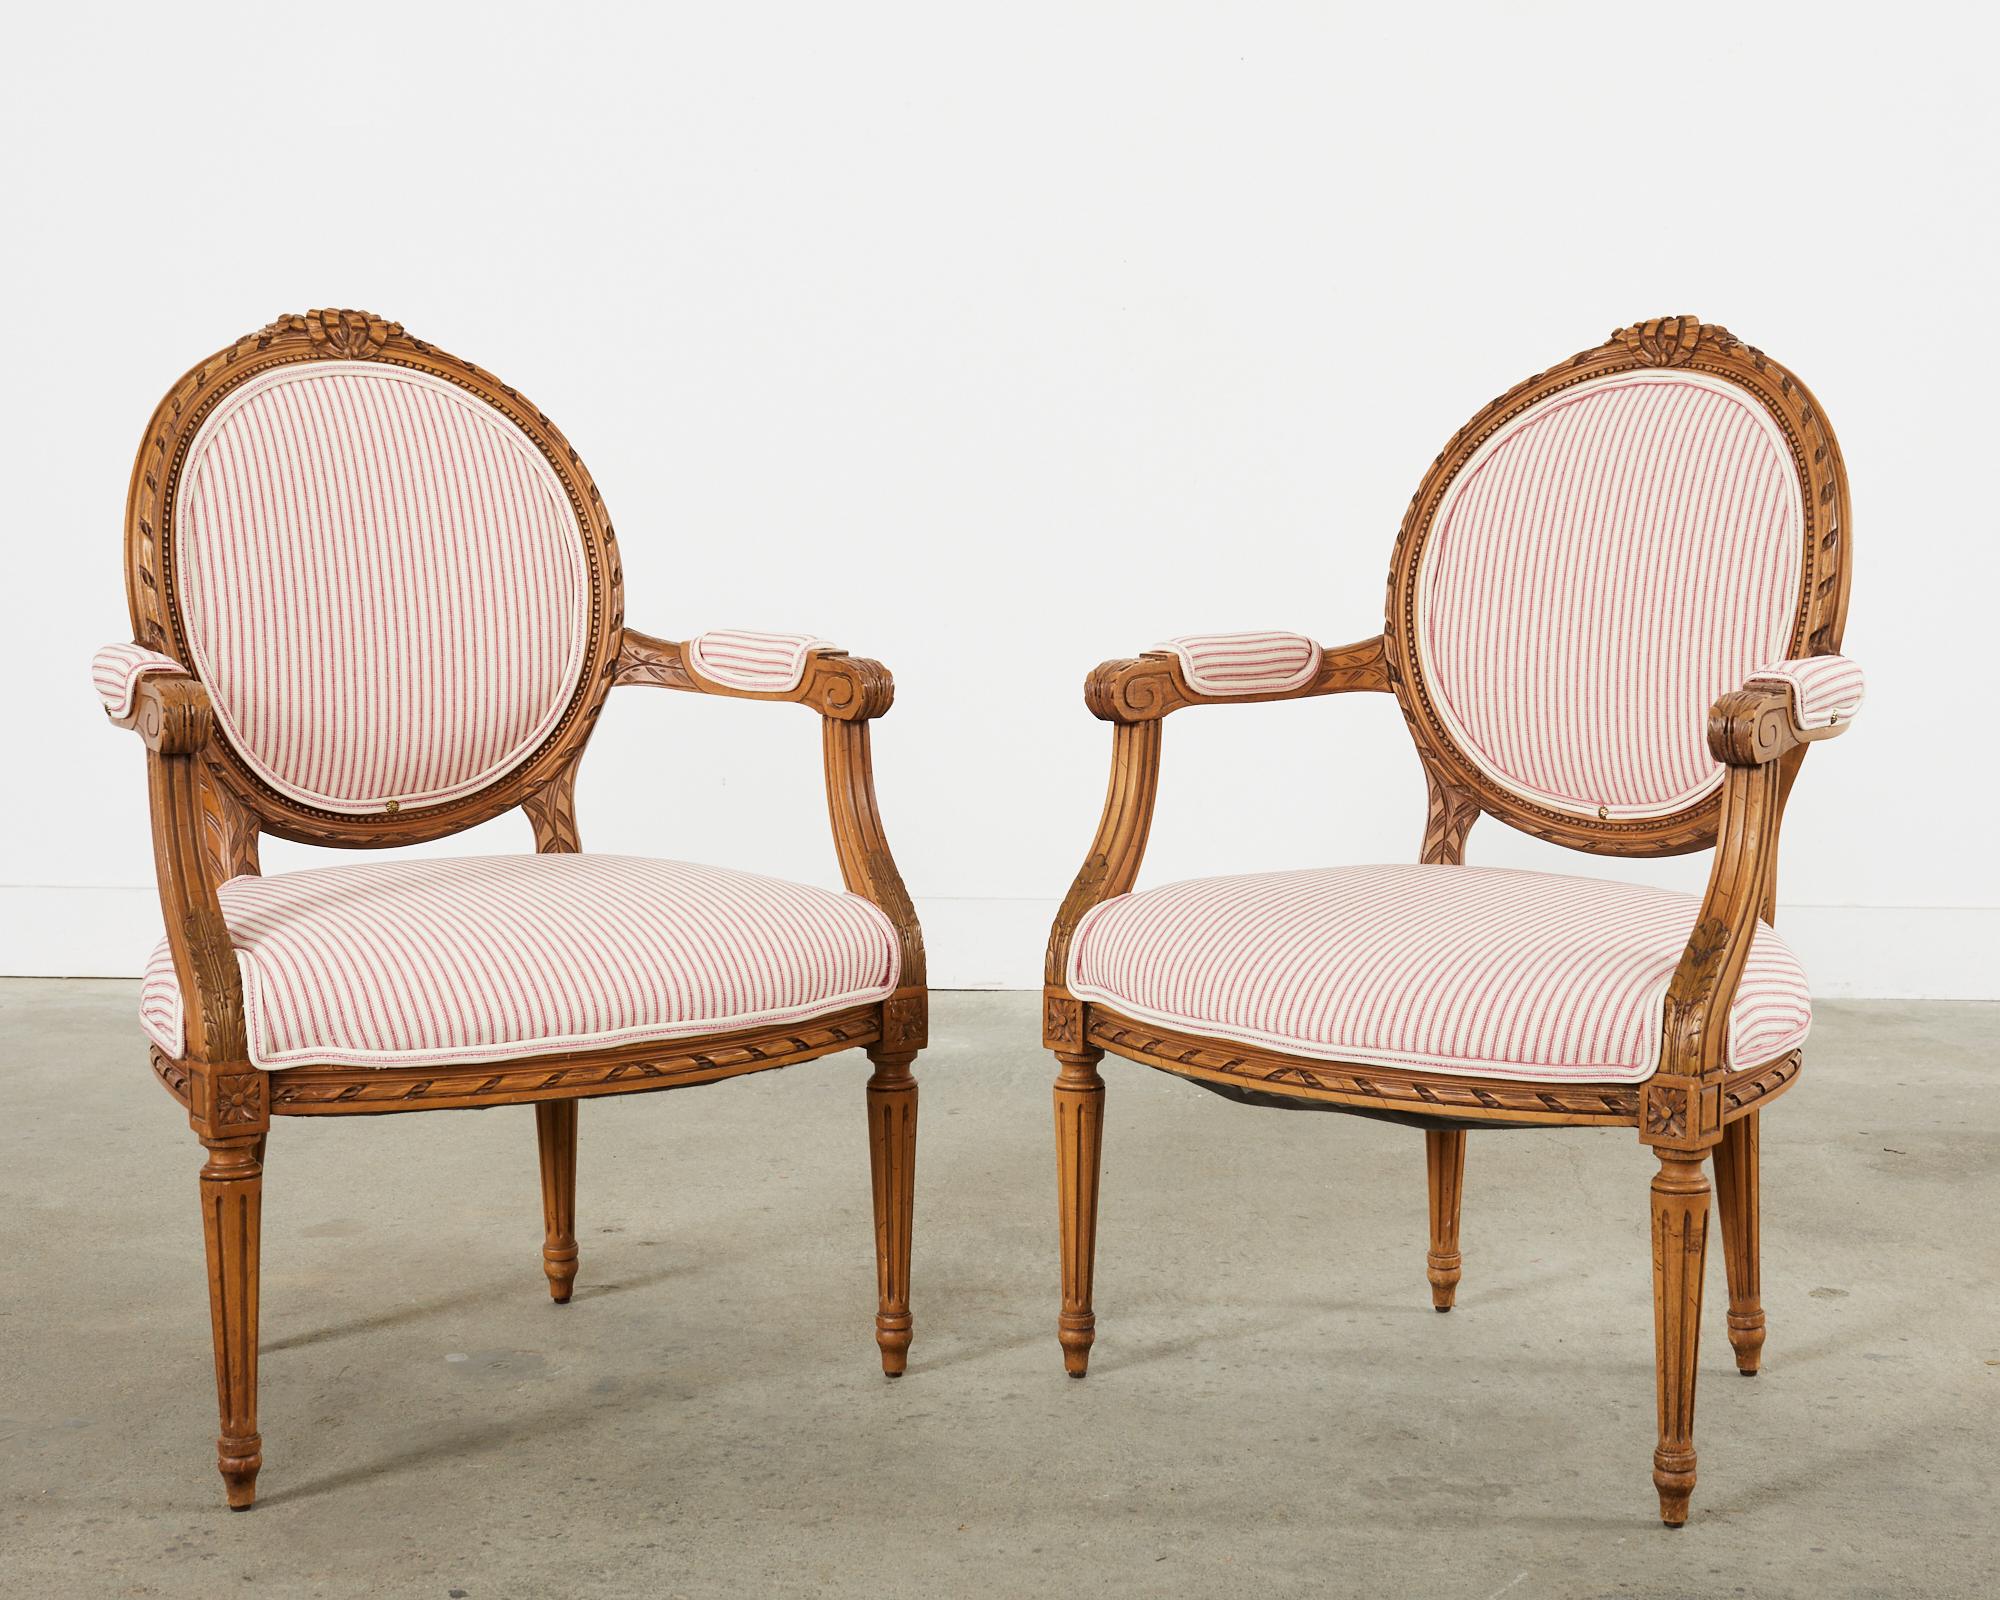 Pair of French Louis XVI Style Cameo Back Fauteuil Armchairs In Good Condition For Sale In Rio Vista, CA